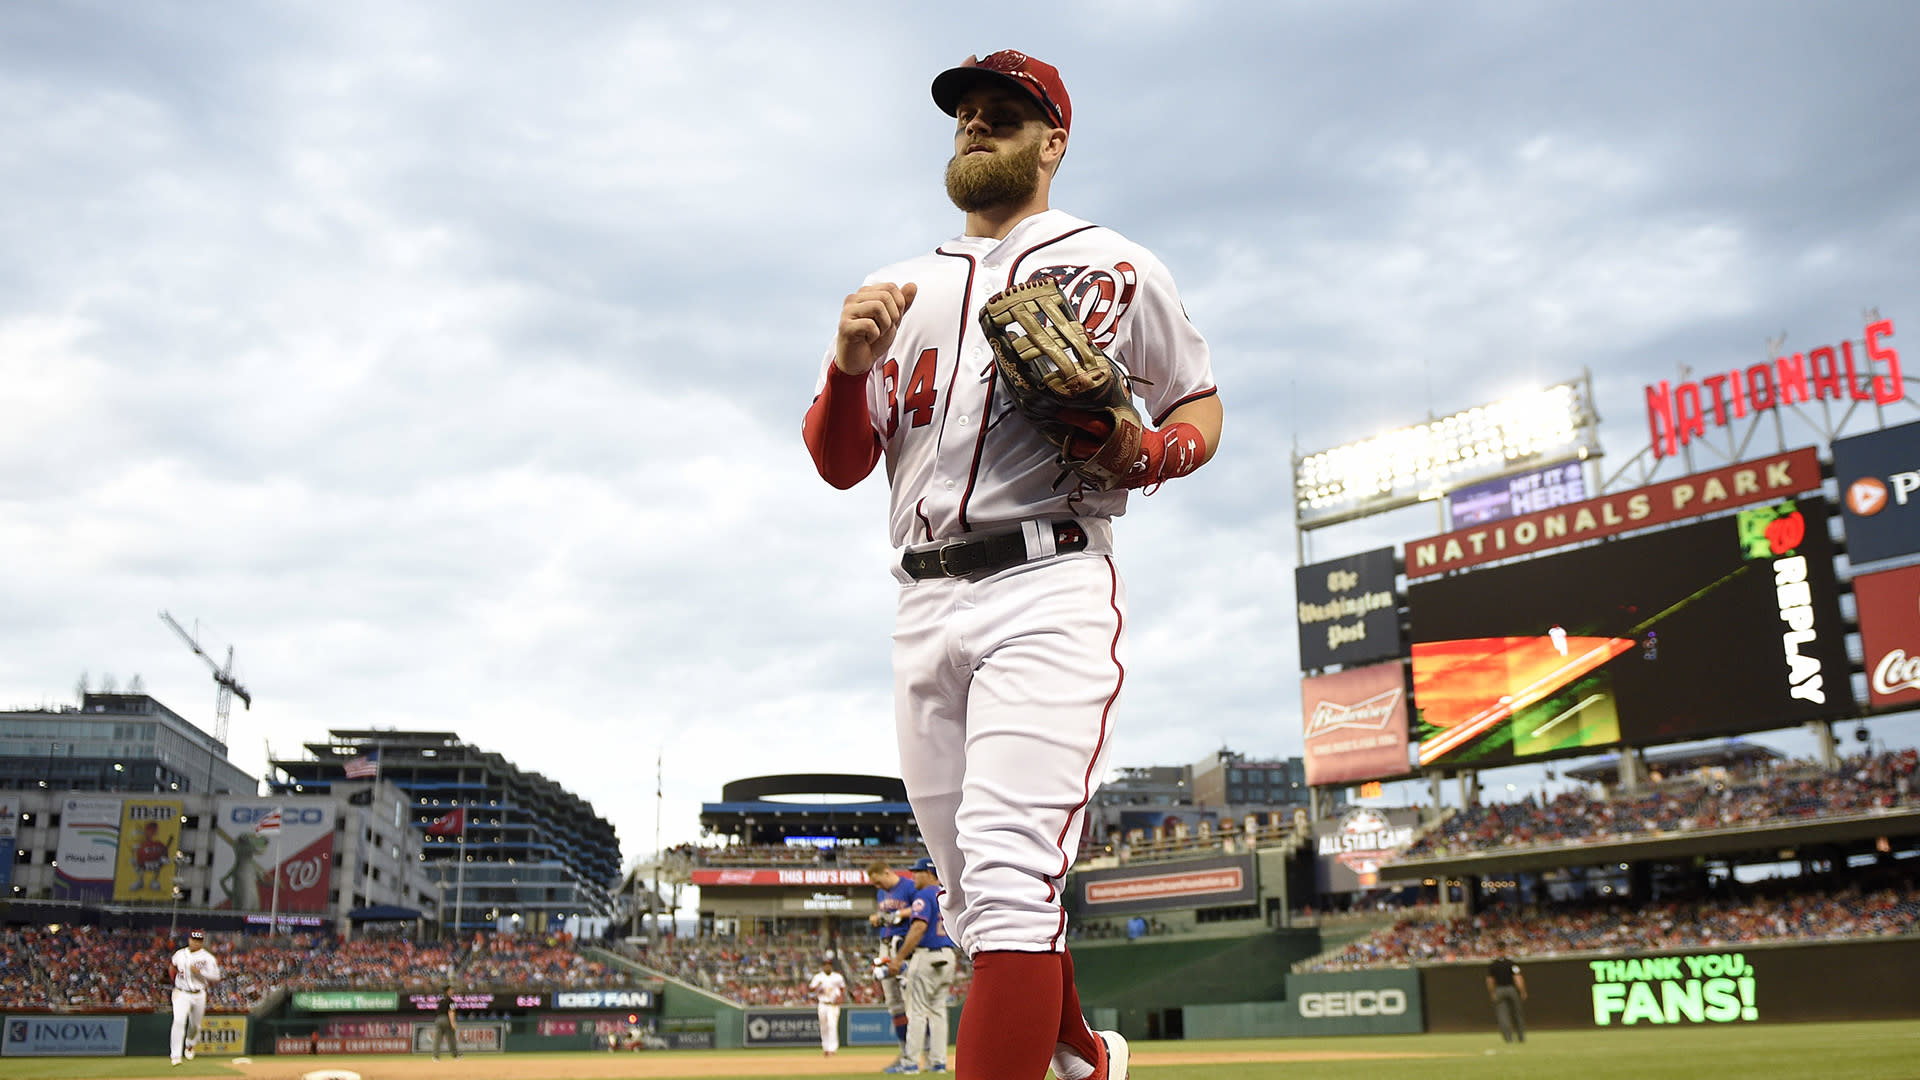 Phillies: Bryce Harper teases interest in playing for Eagles